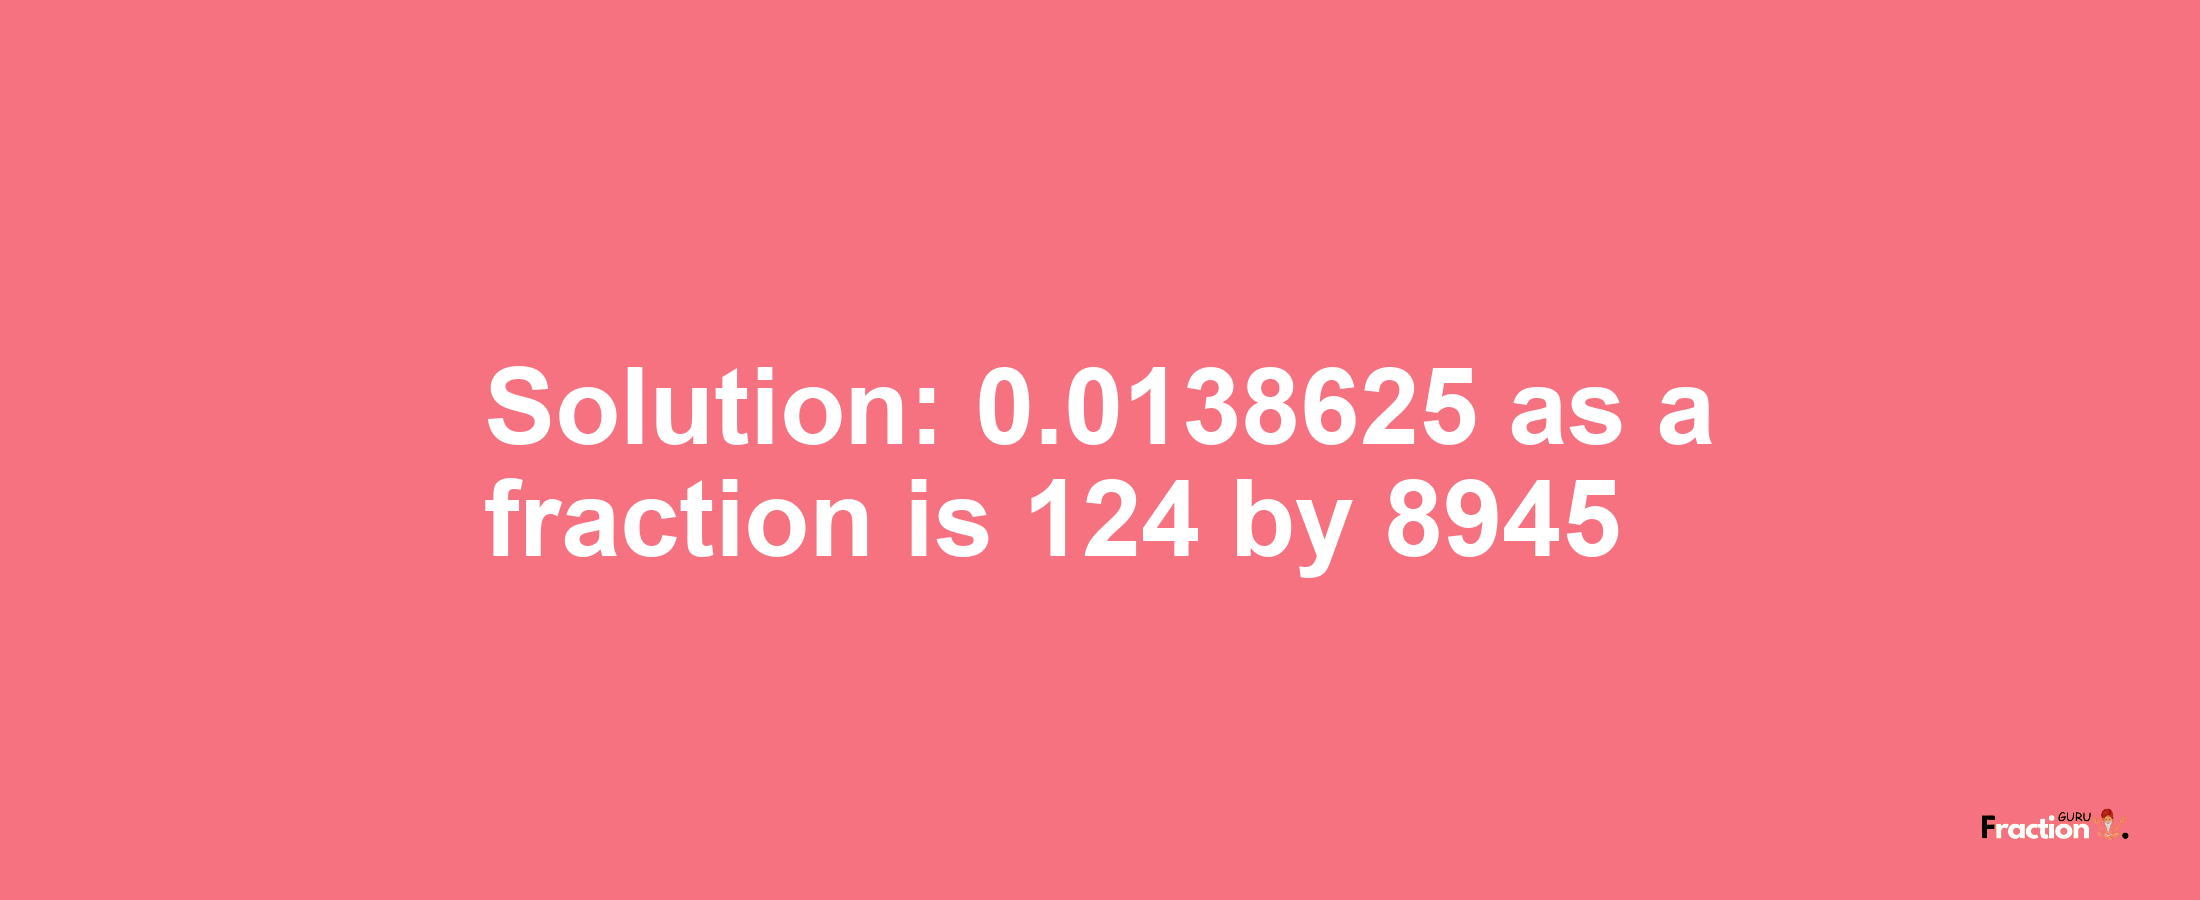 Solution:0.0138625 as a fraction is 124/8945